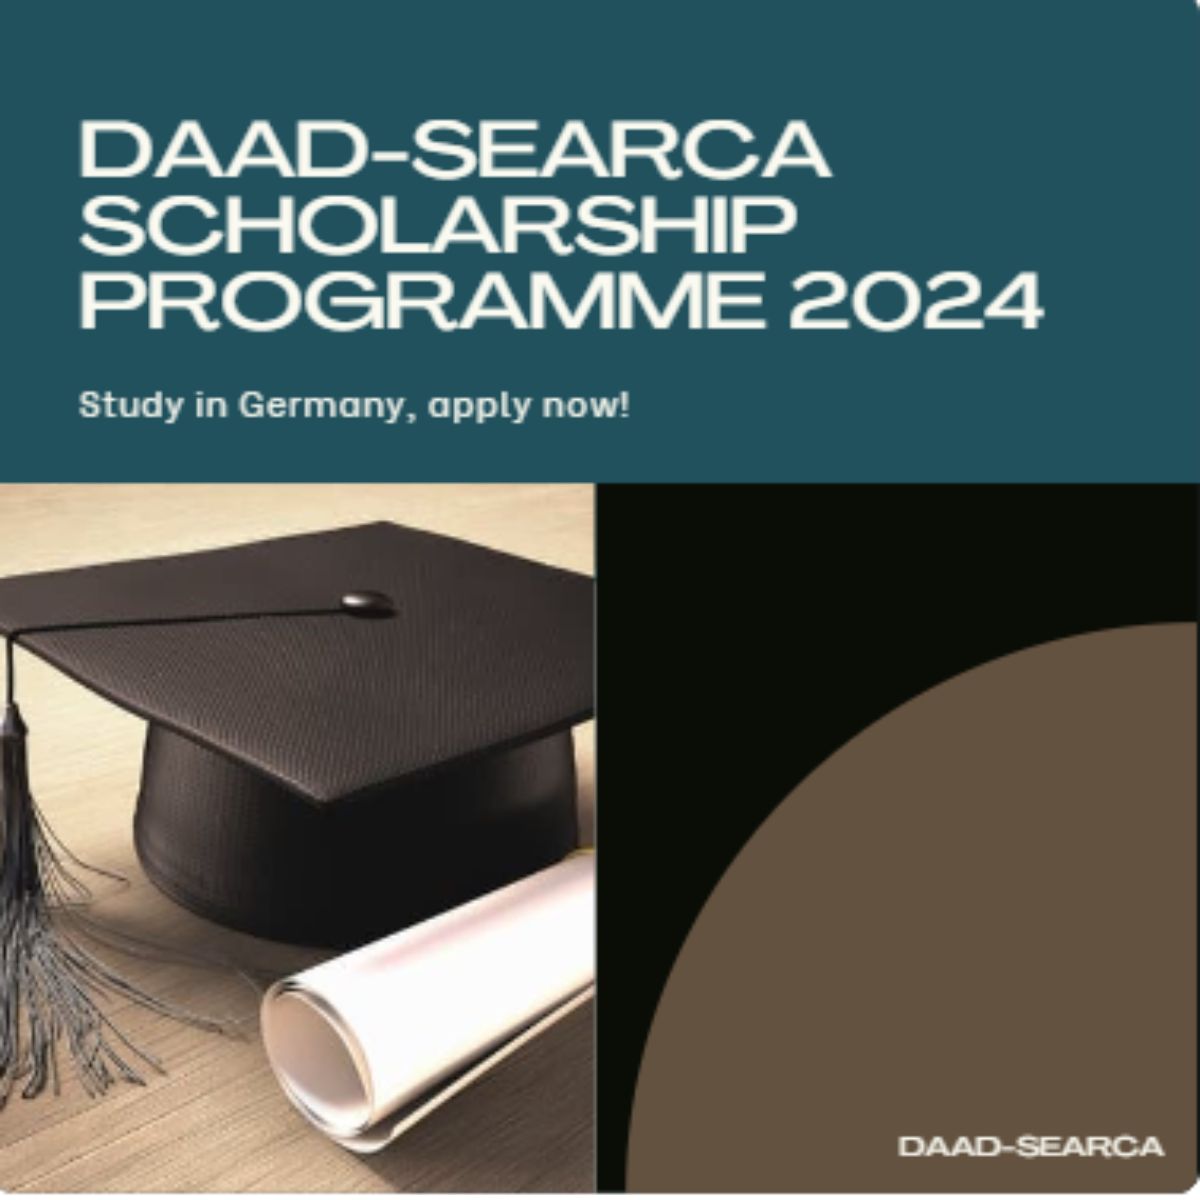 DAAD-SEARCA Scholarship Programme 2024 (Fully Funded)